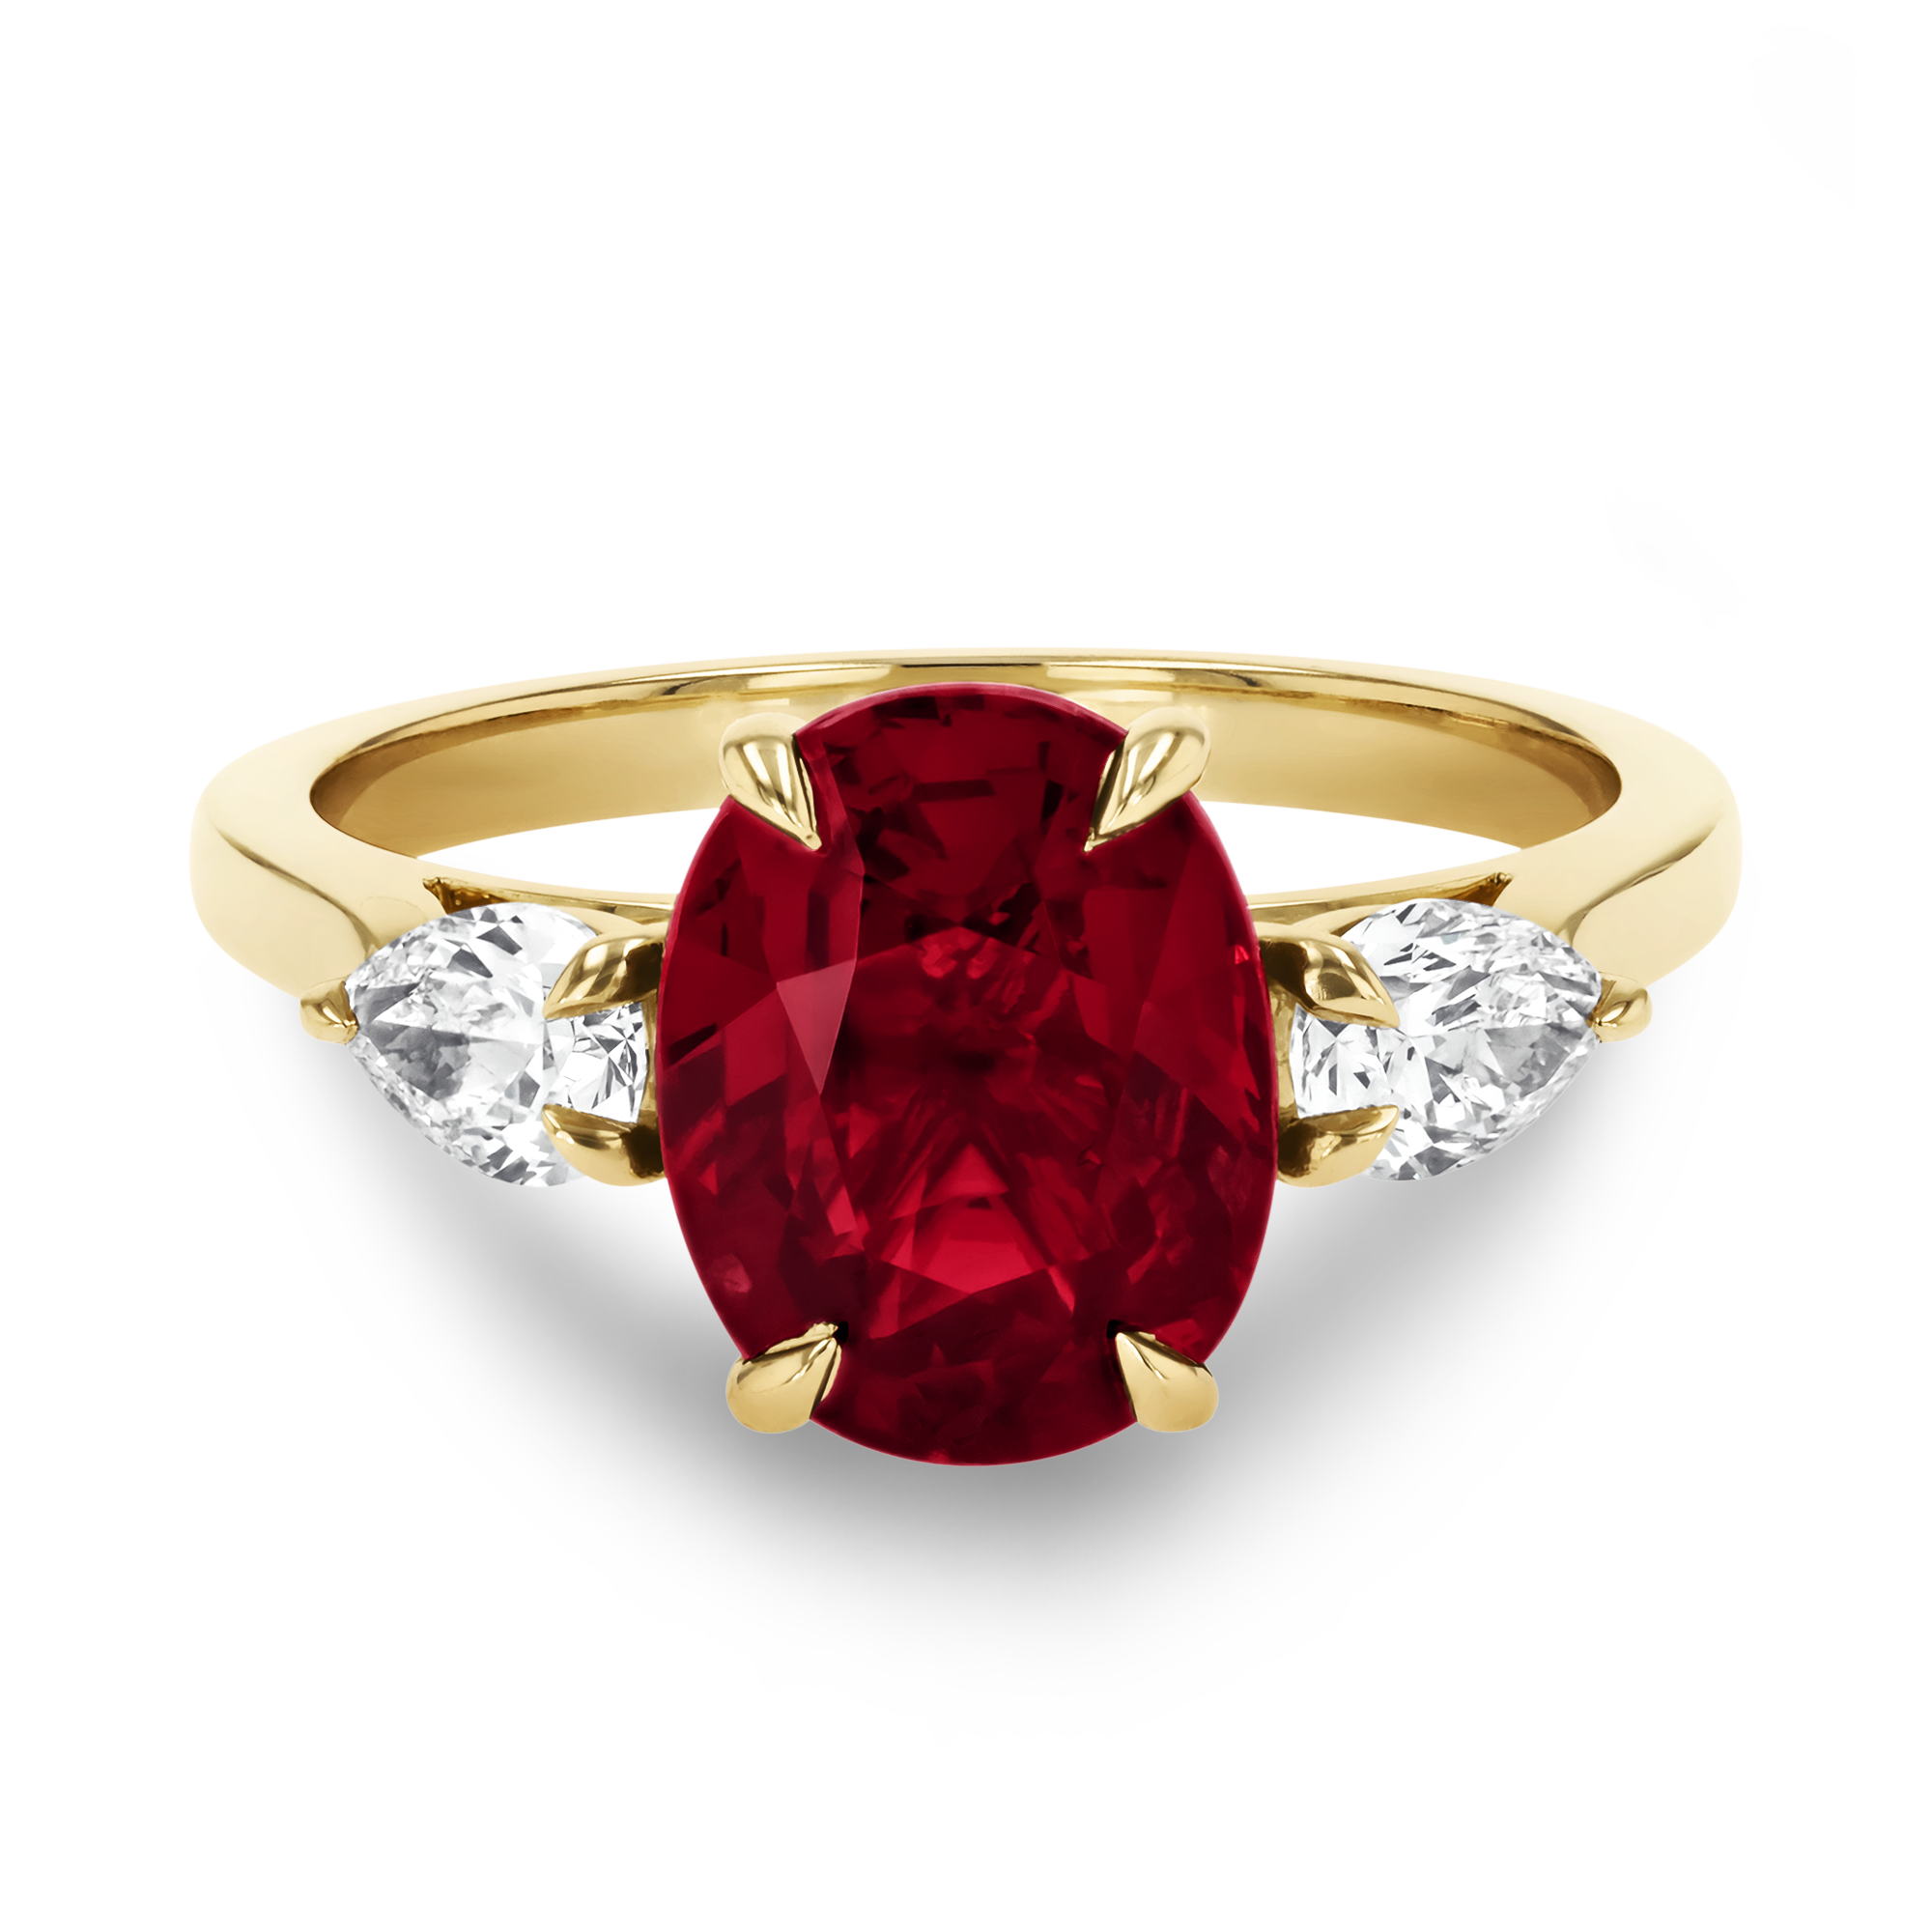 Mozambique 3.03ct Ruby and Diamond Three Stone Ring Oval Cut, Claw Set_2